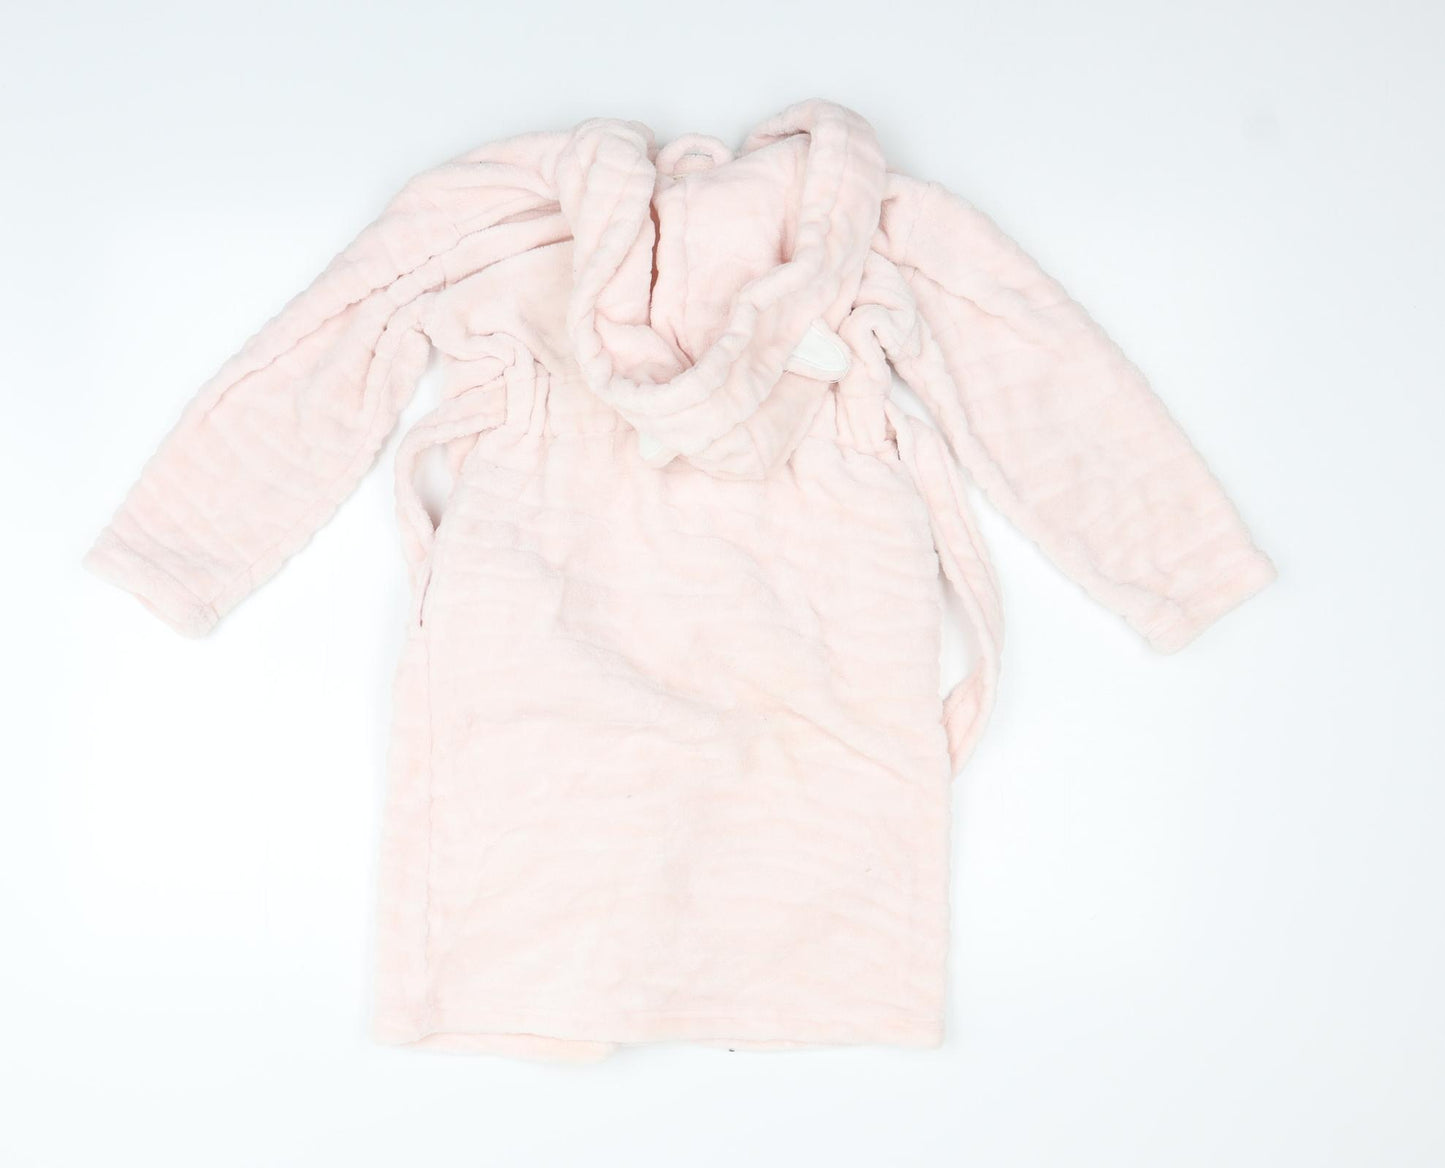 F&F Girls Pink Solid  Top Gown Size 7-8 Years  - BELTED